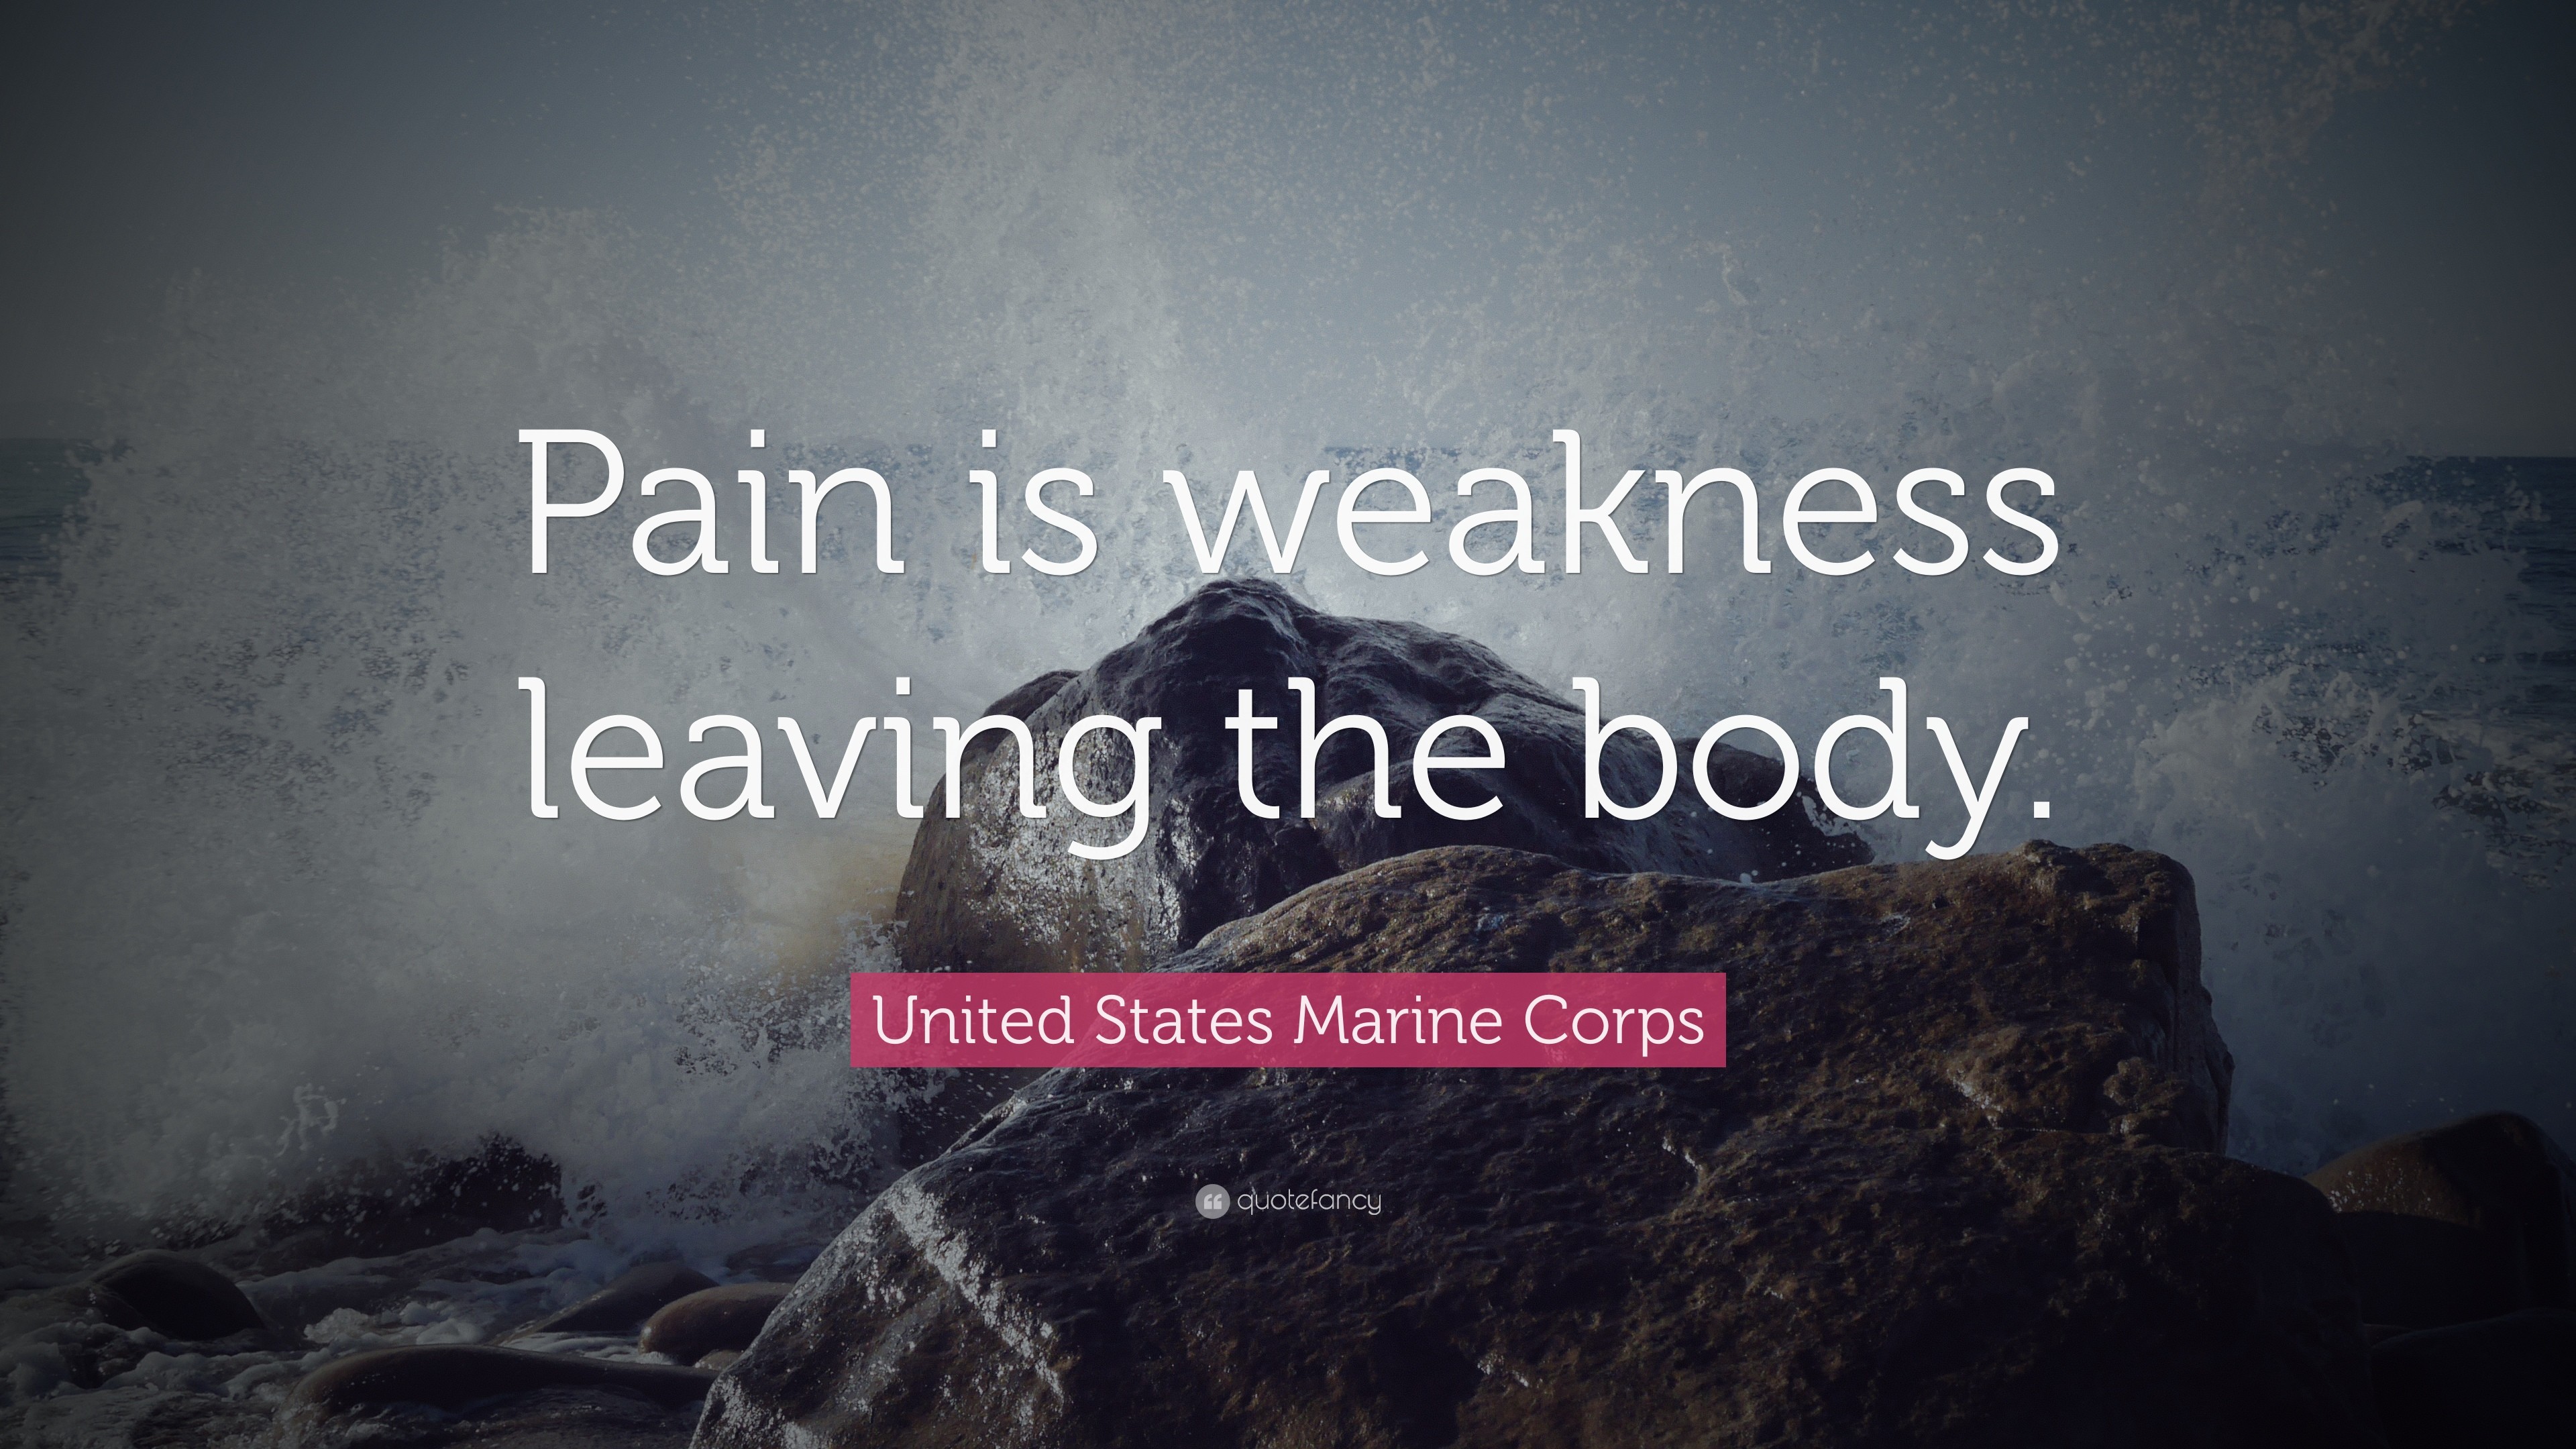 United States Marine Corps Quote Pain is weakness leaving the body.